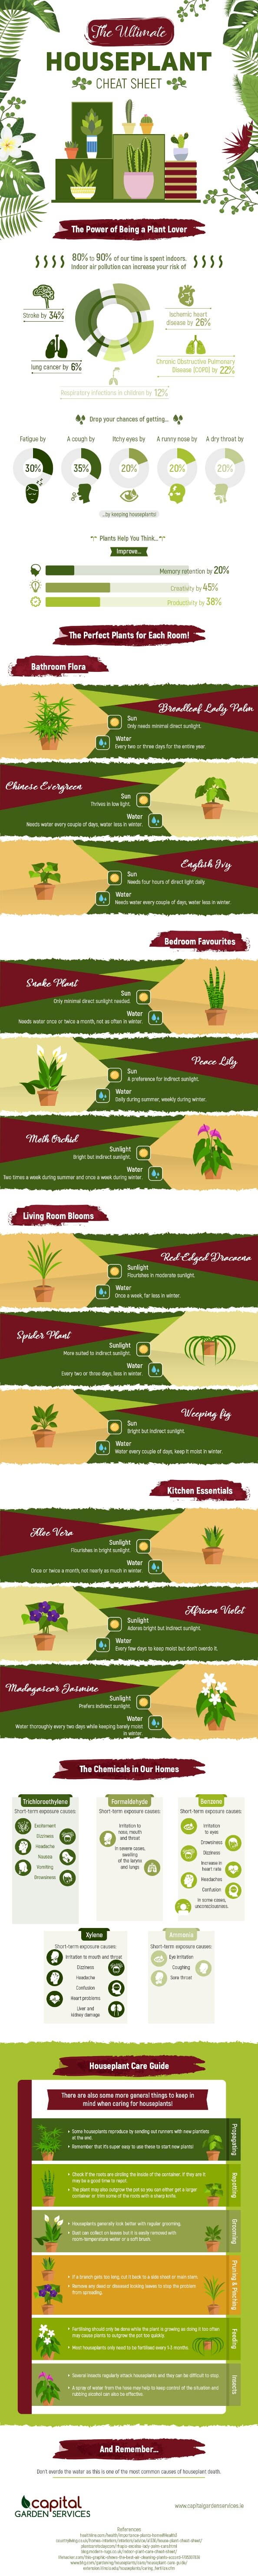 The Ultimate Houseplant Cheat Sheet